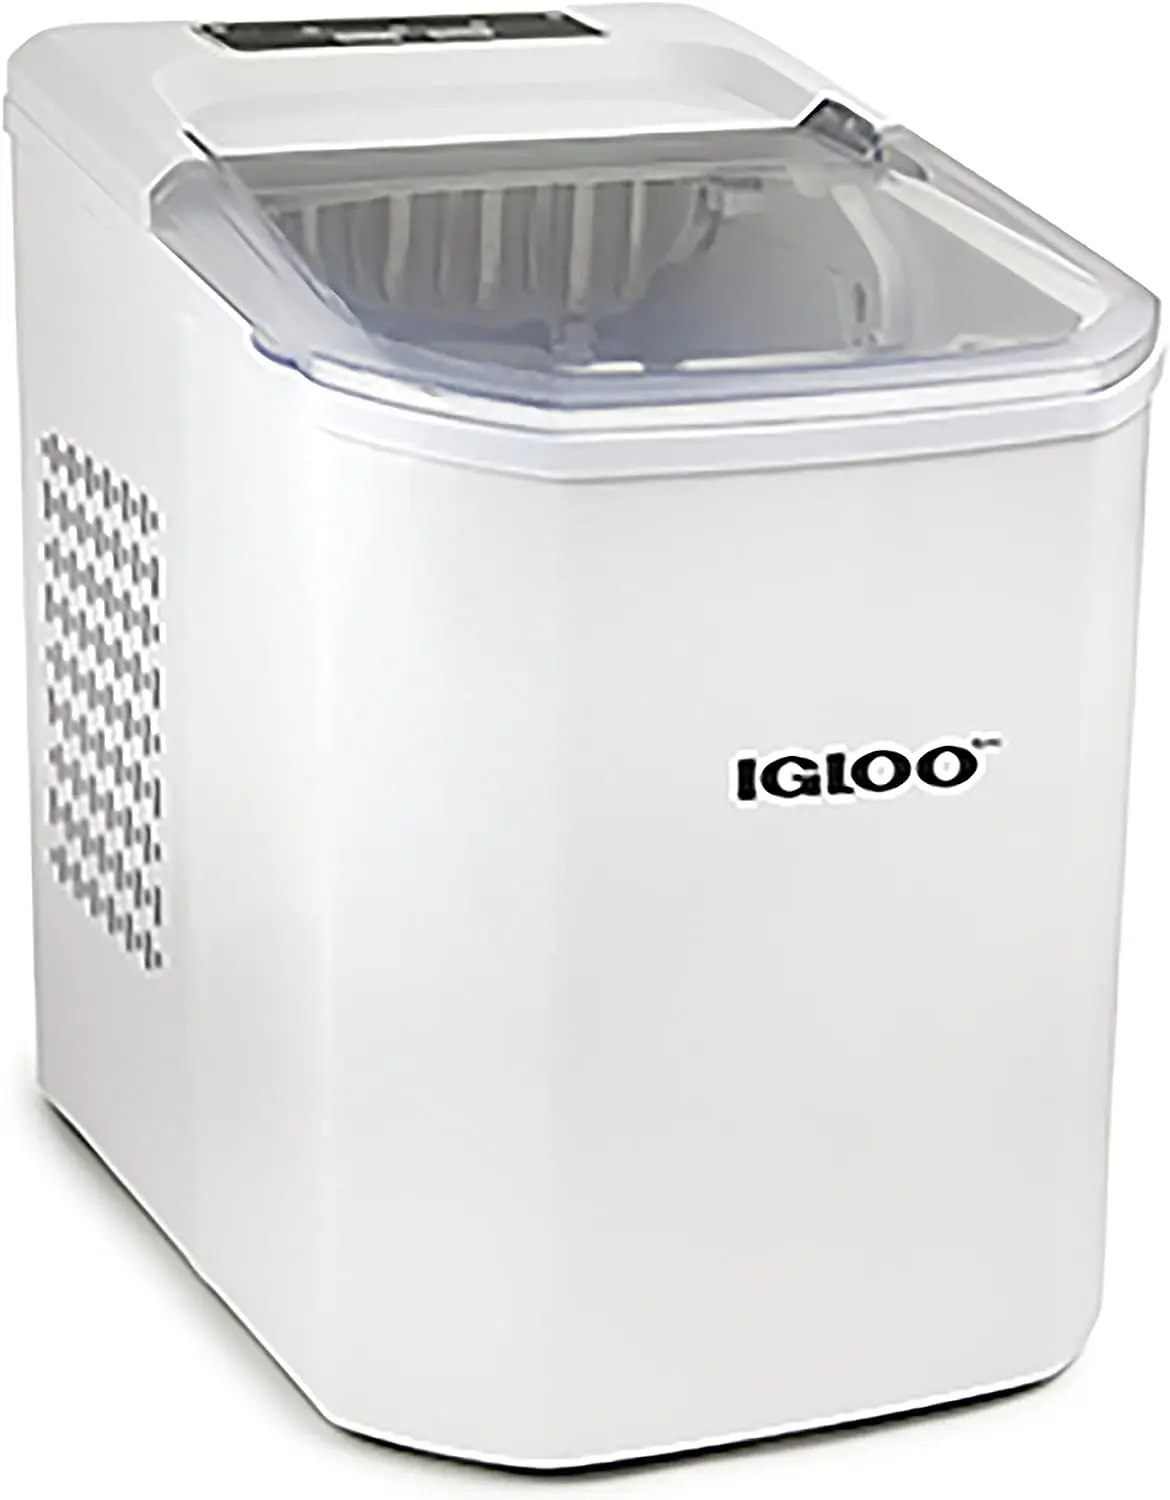 

Self-Cleaning 26-Pound Ice Maker, Countertop Size, Large or Small Cubes, LED Control Panel, Scoop Included, White